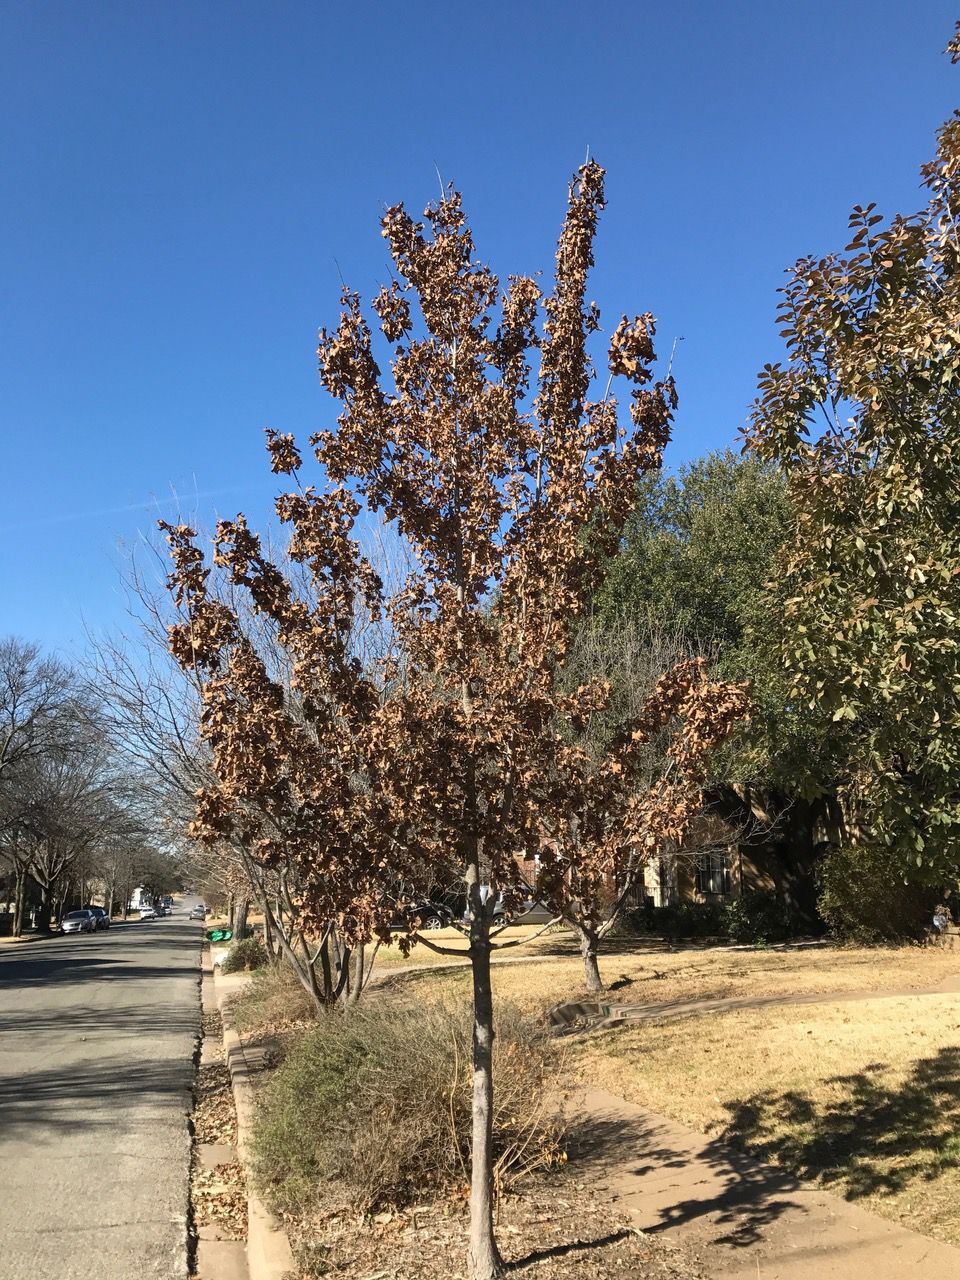 Why Is My Tree Losing Its Leaves in Summer?